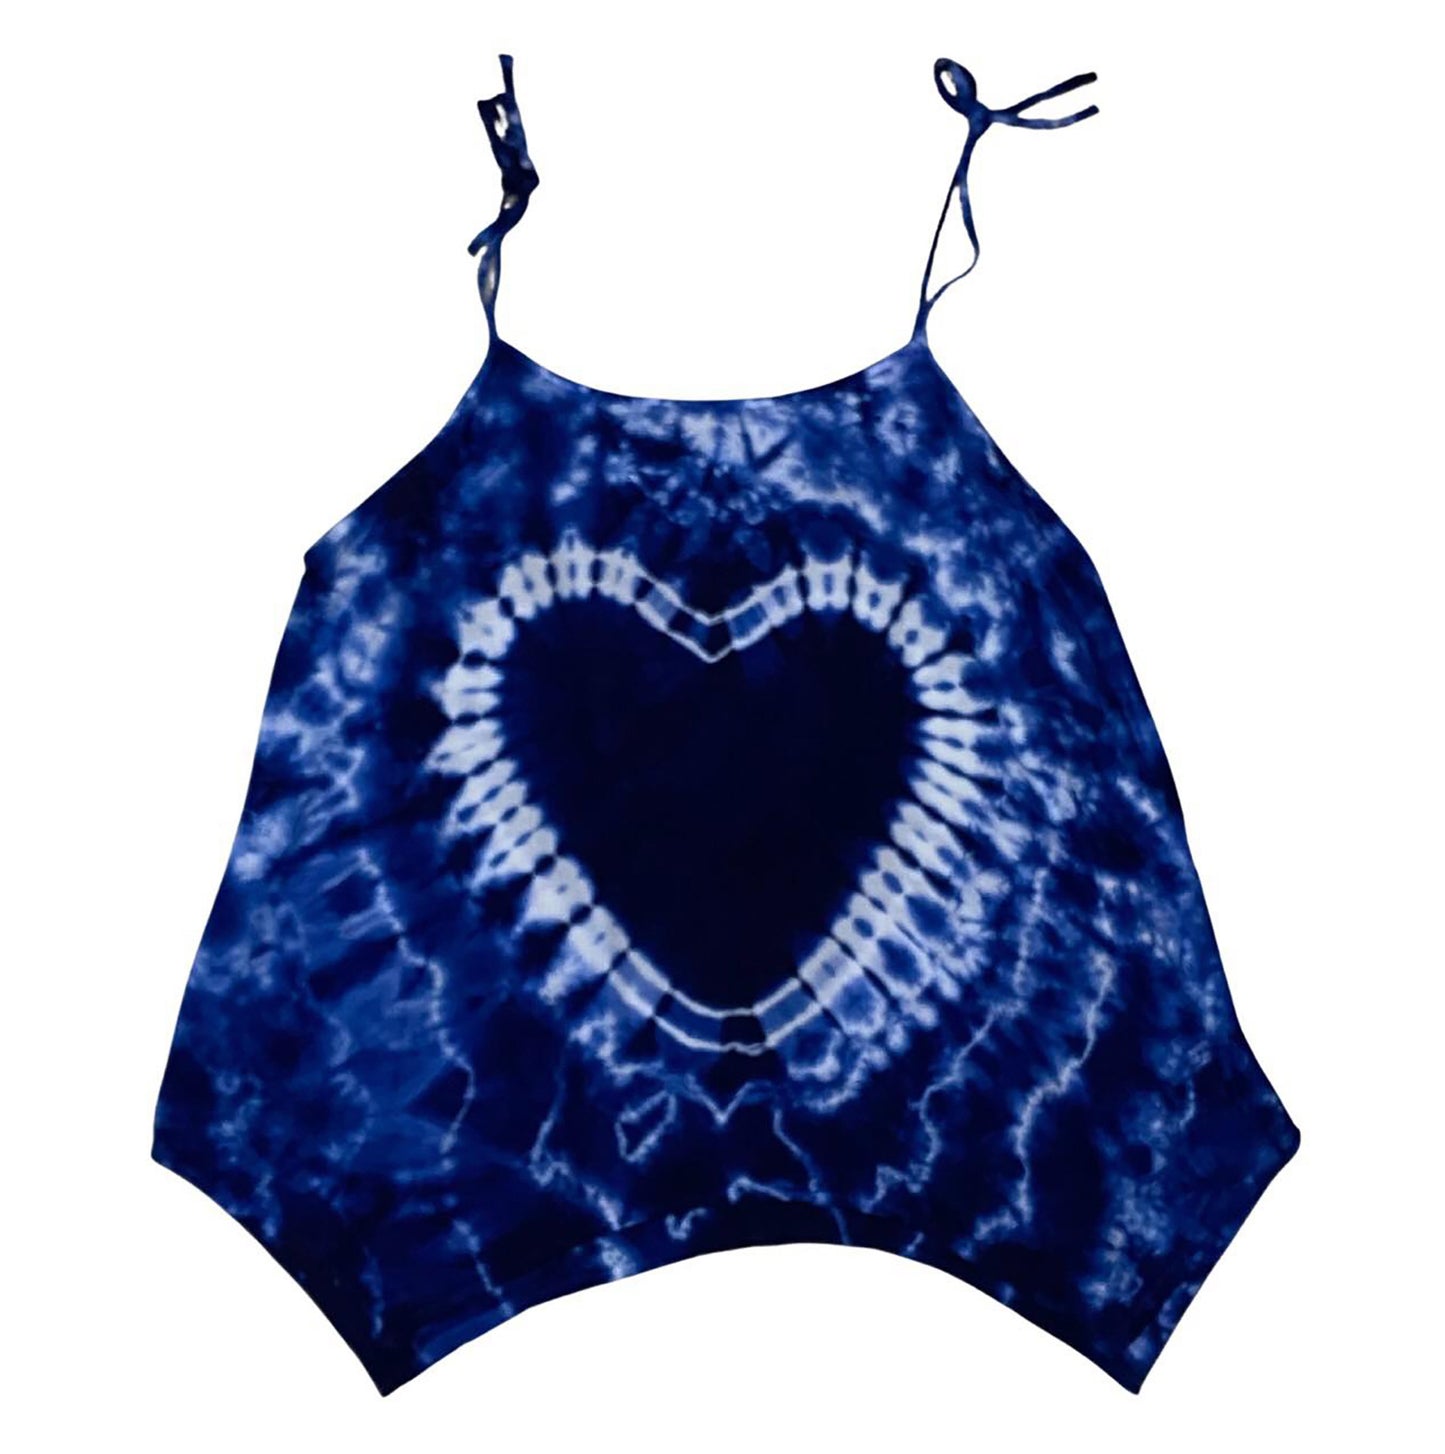 Cami Camisole Teen & Women, One Size Free Size Fit 0 to 8, Handmade Tie Dyed - Indigo Blue Heart